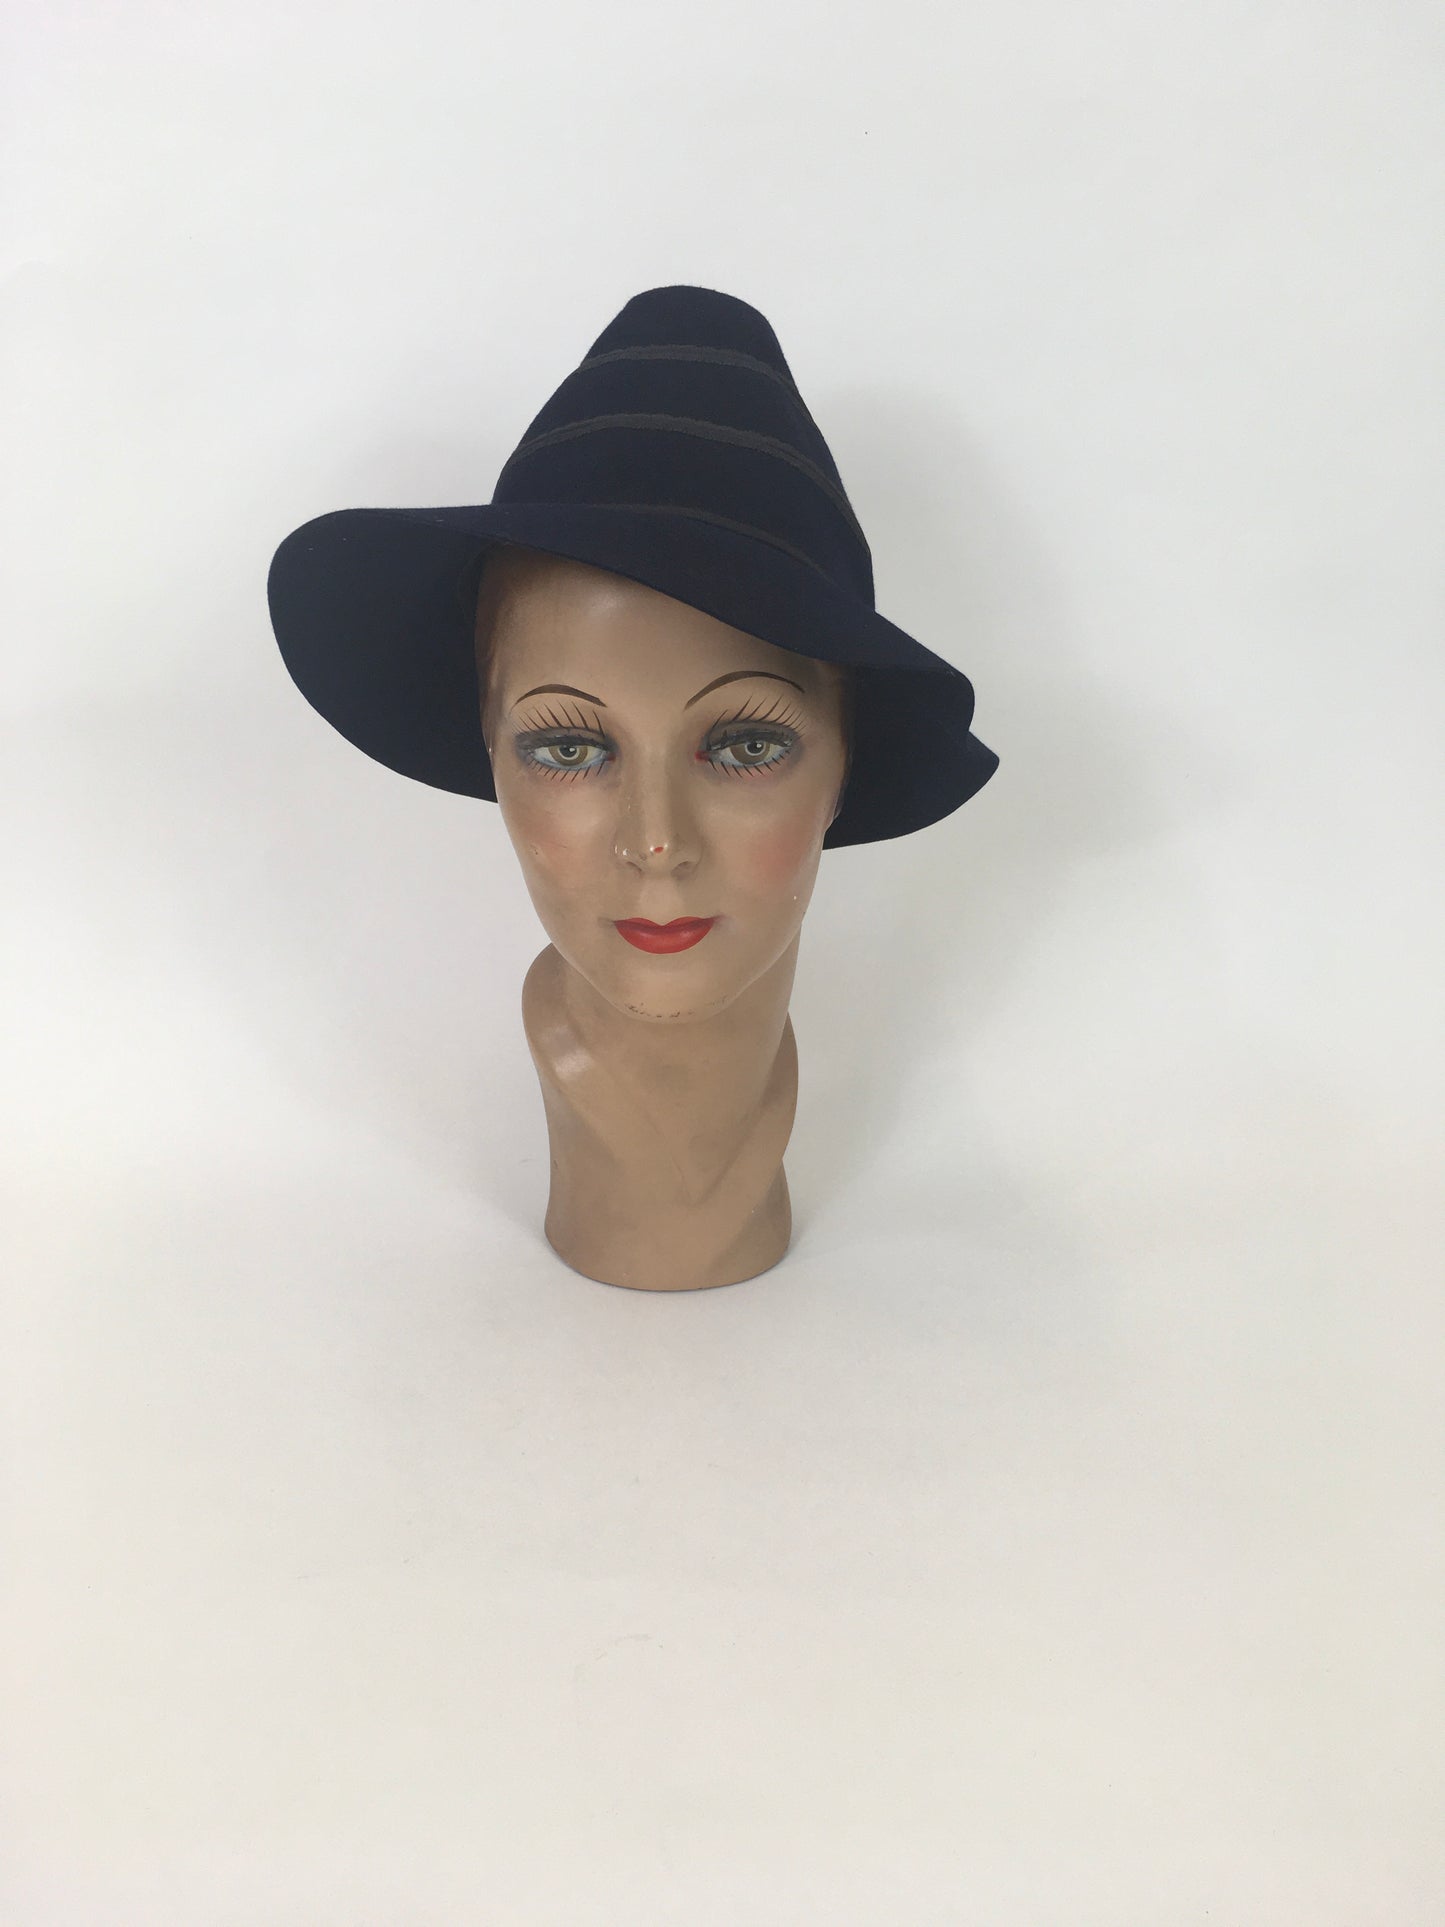 Original 1930’s / 1940’s Fedora Hat with Bow Detailing - In A Deep Navy